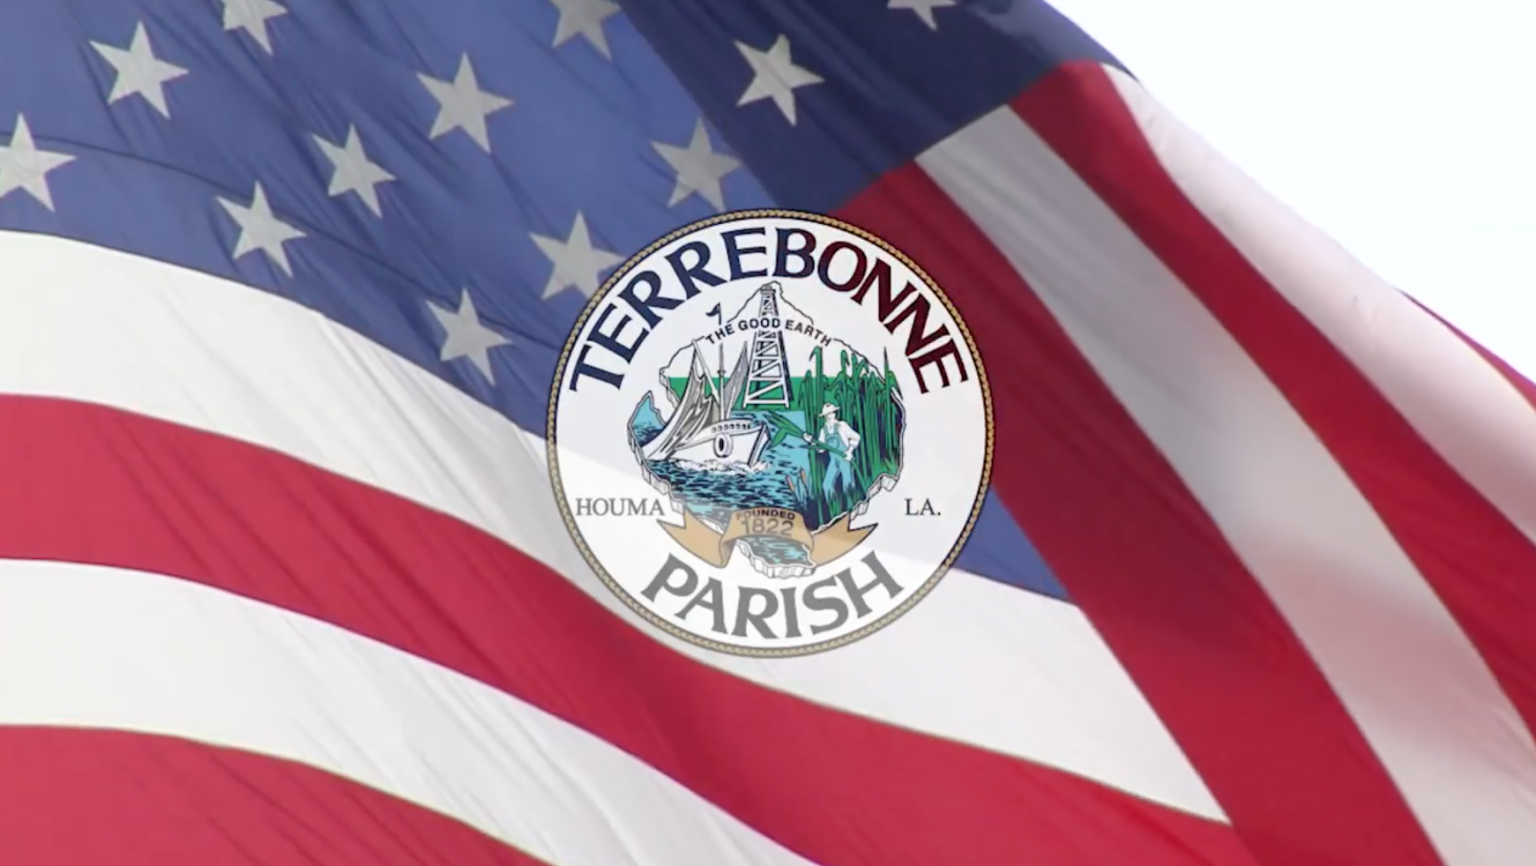 VIDEO Early voting in Terrebonne Parish to look different this year